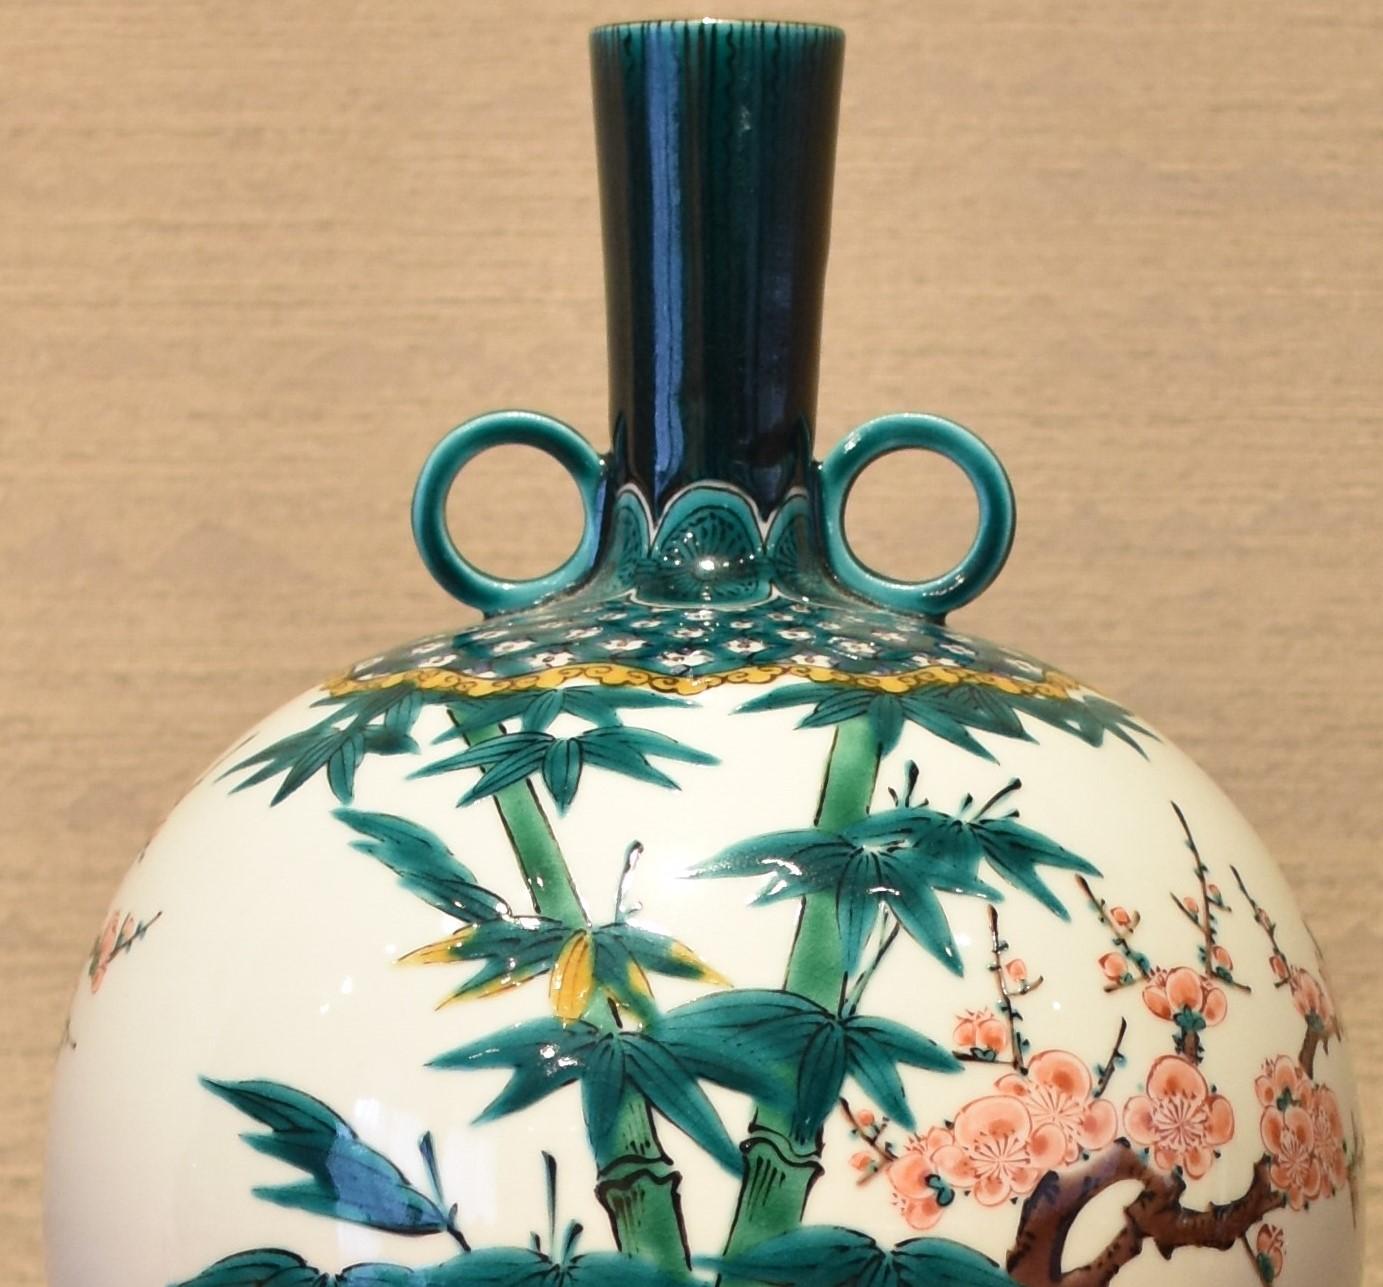 Japanese Contemporary Green Red Porcelain Vase by Master Artist 2